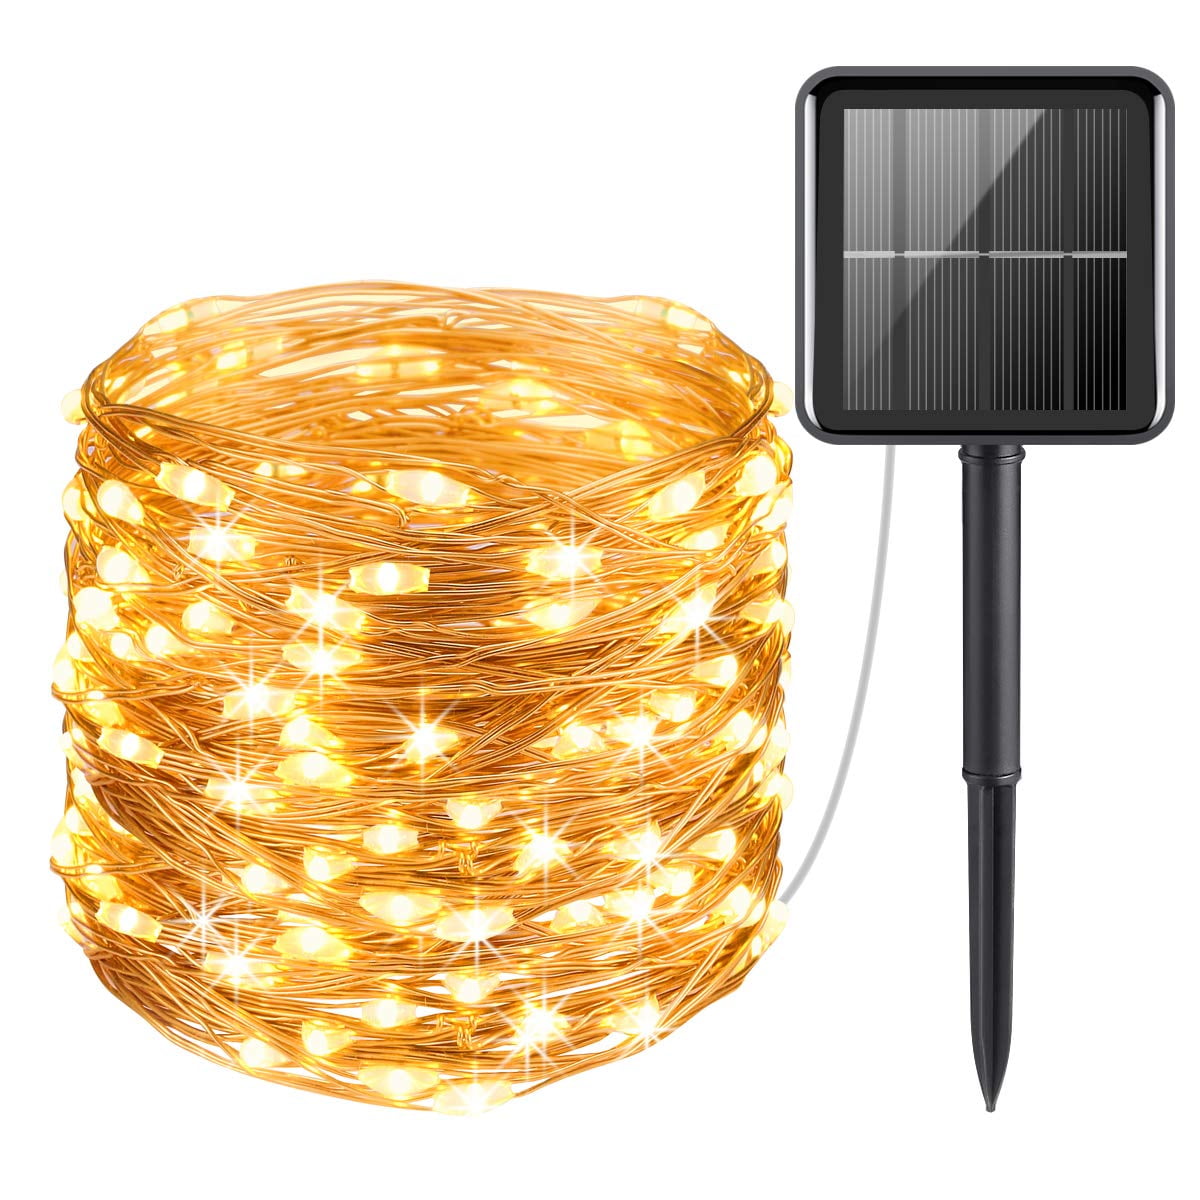 Details about   100 LED Solar String Lights Outdoor Garden Party Xmas Fairy Wedding Lamp 